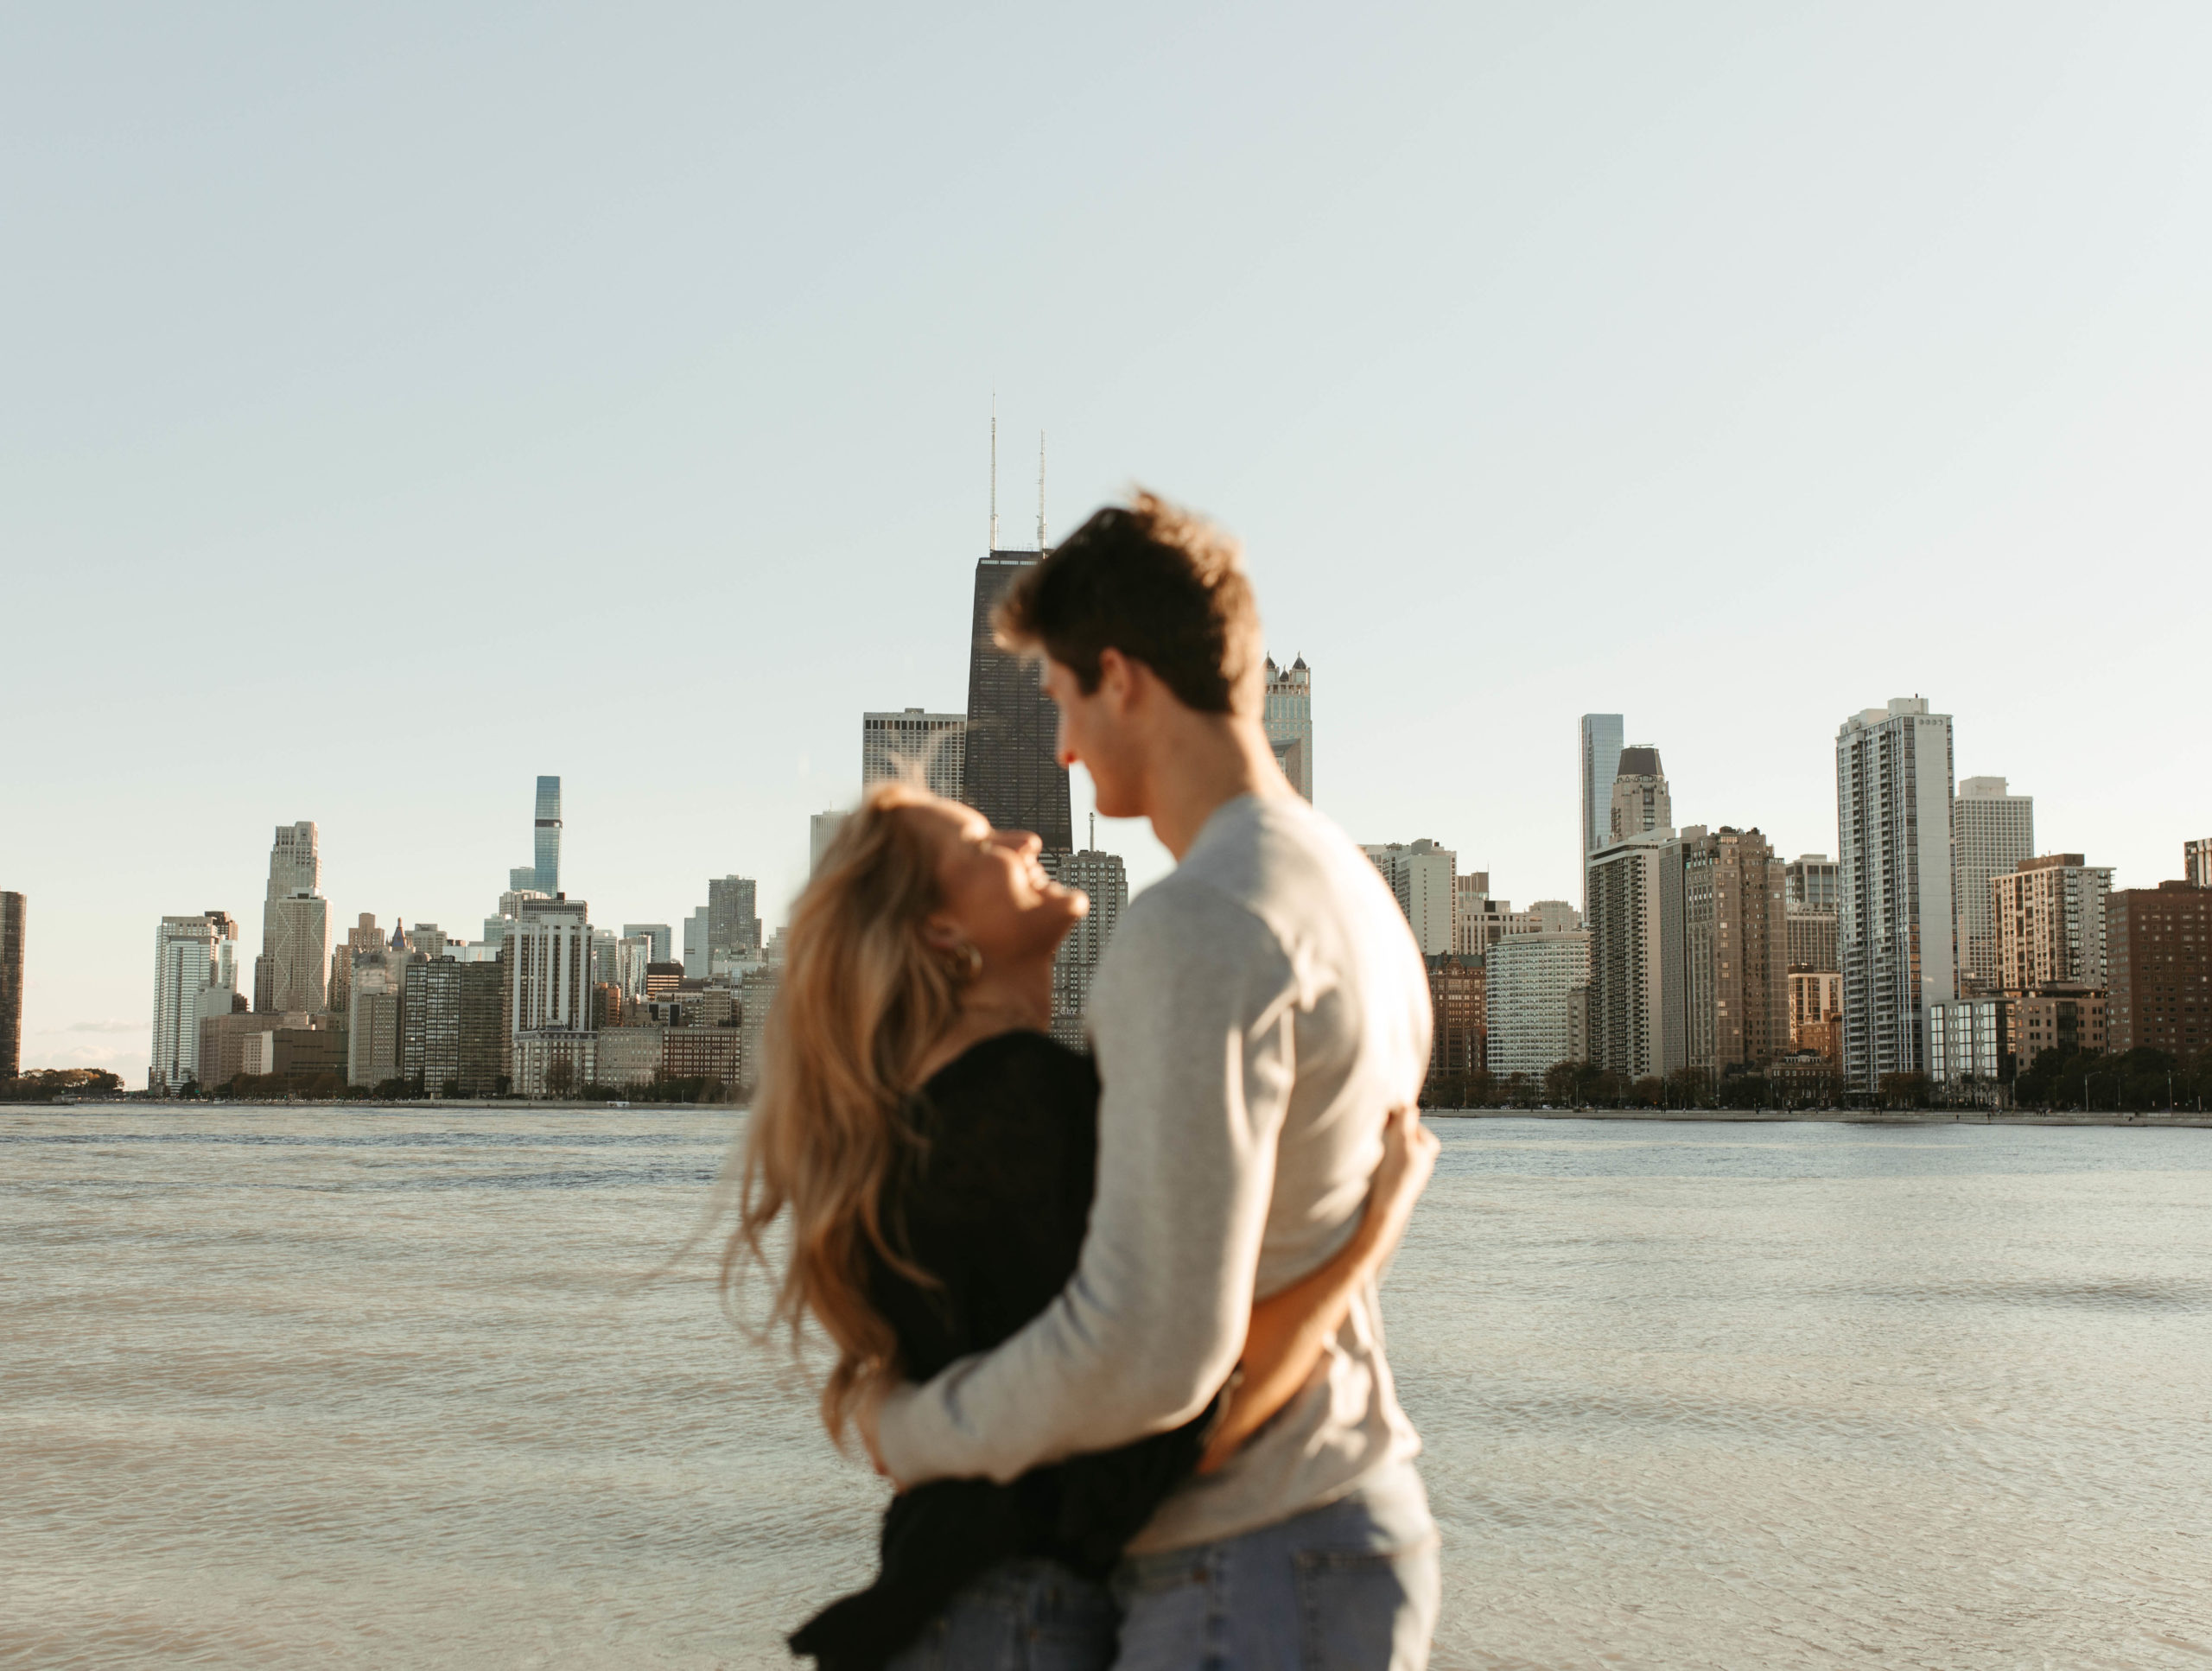 Chicago wedding photographer gives tips and tricks for engagement photos